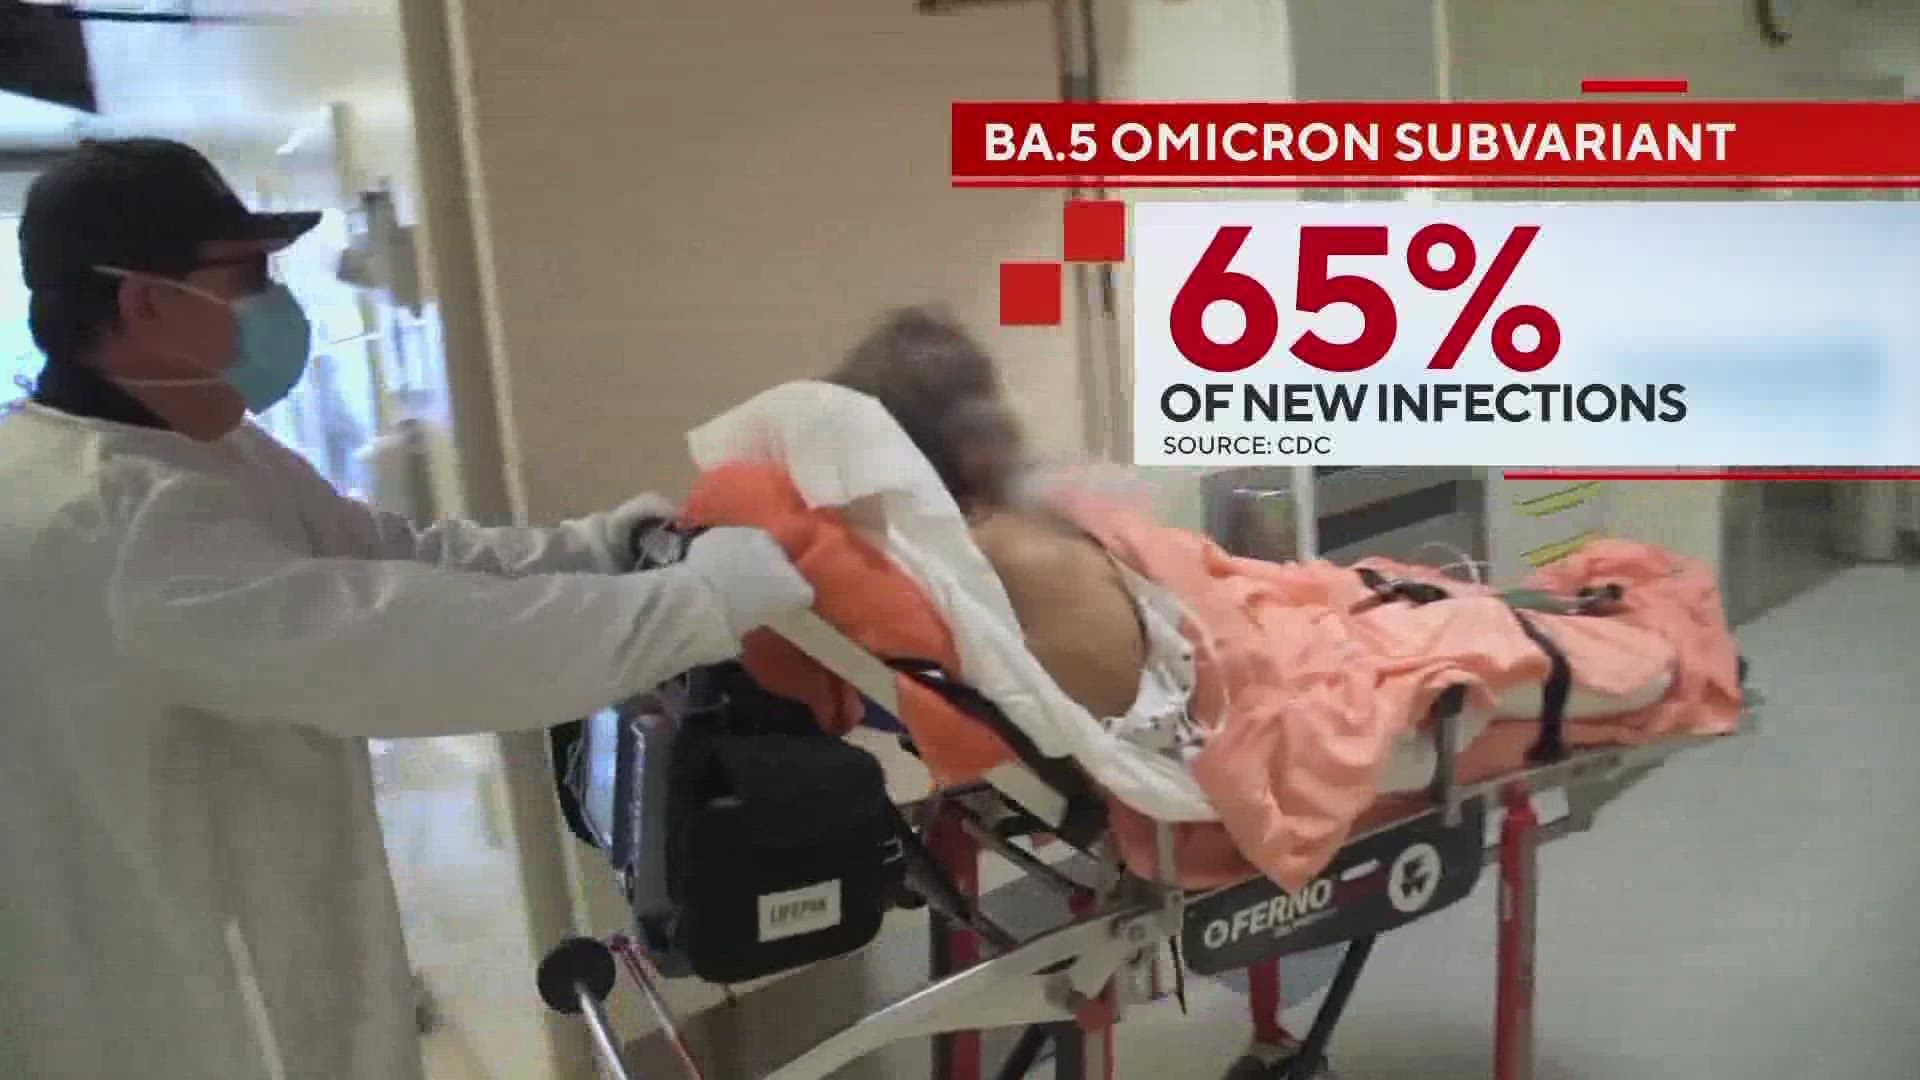 Omicron variant BA.5 is now responsible for almost two in three new cases, and hospitalizations are expected to rise.